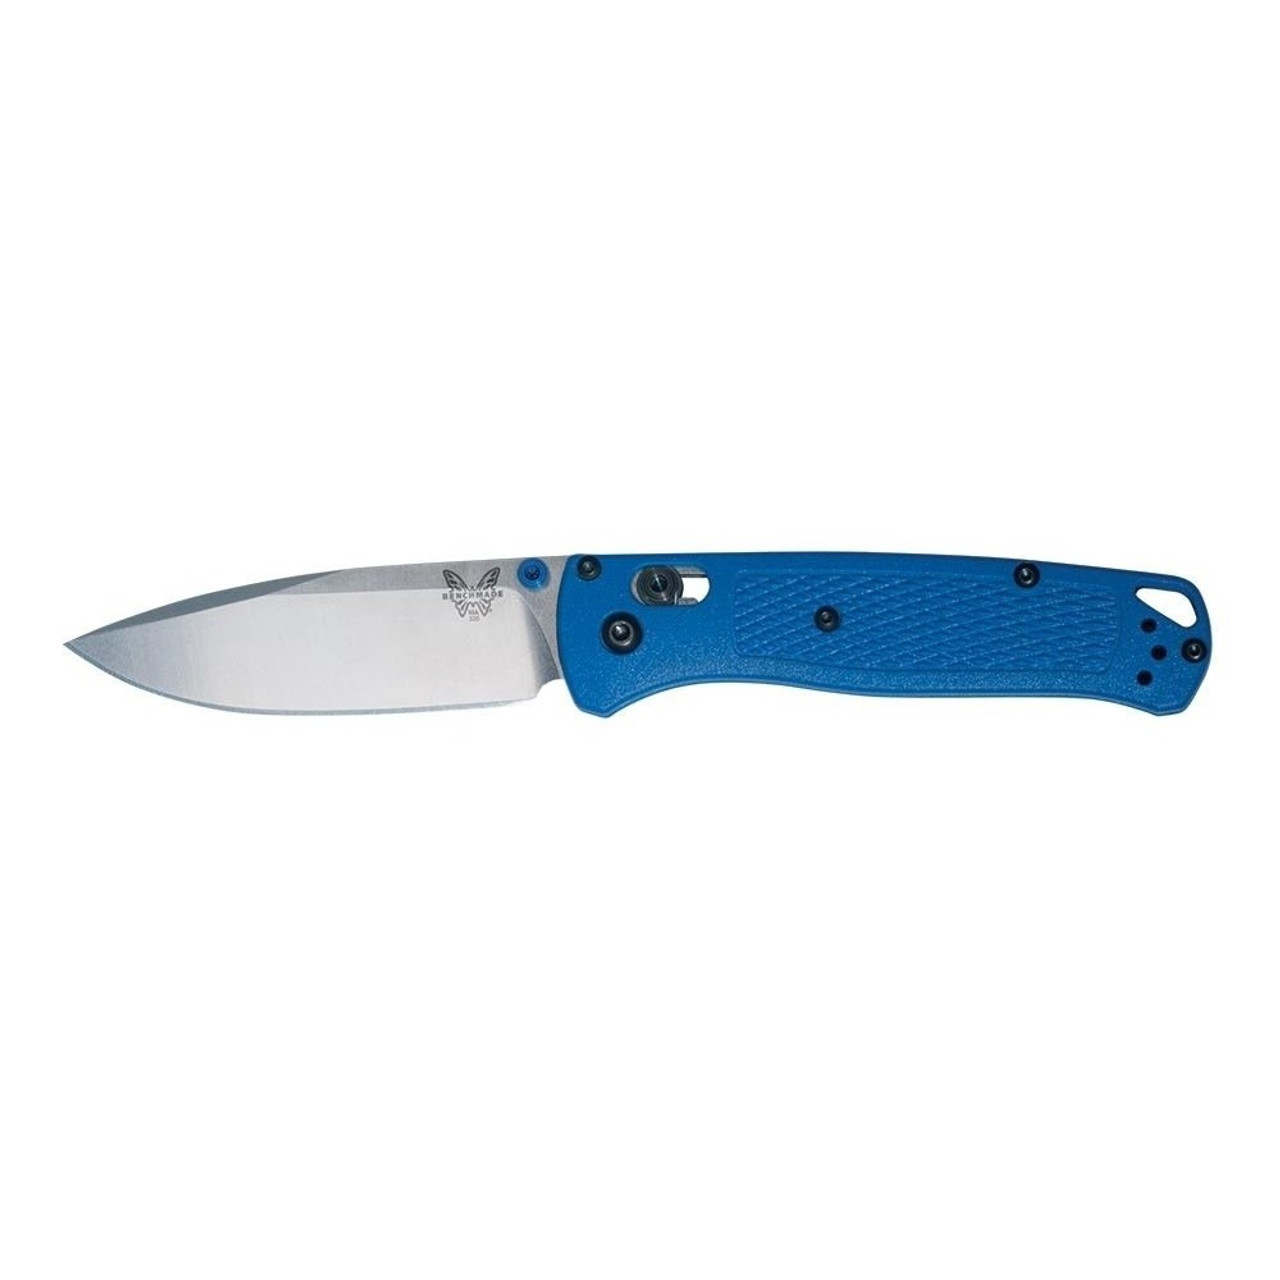  Benchmade - Bugout 535 EDC Knife with Blue Grivory